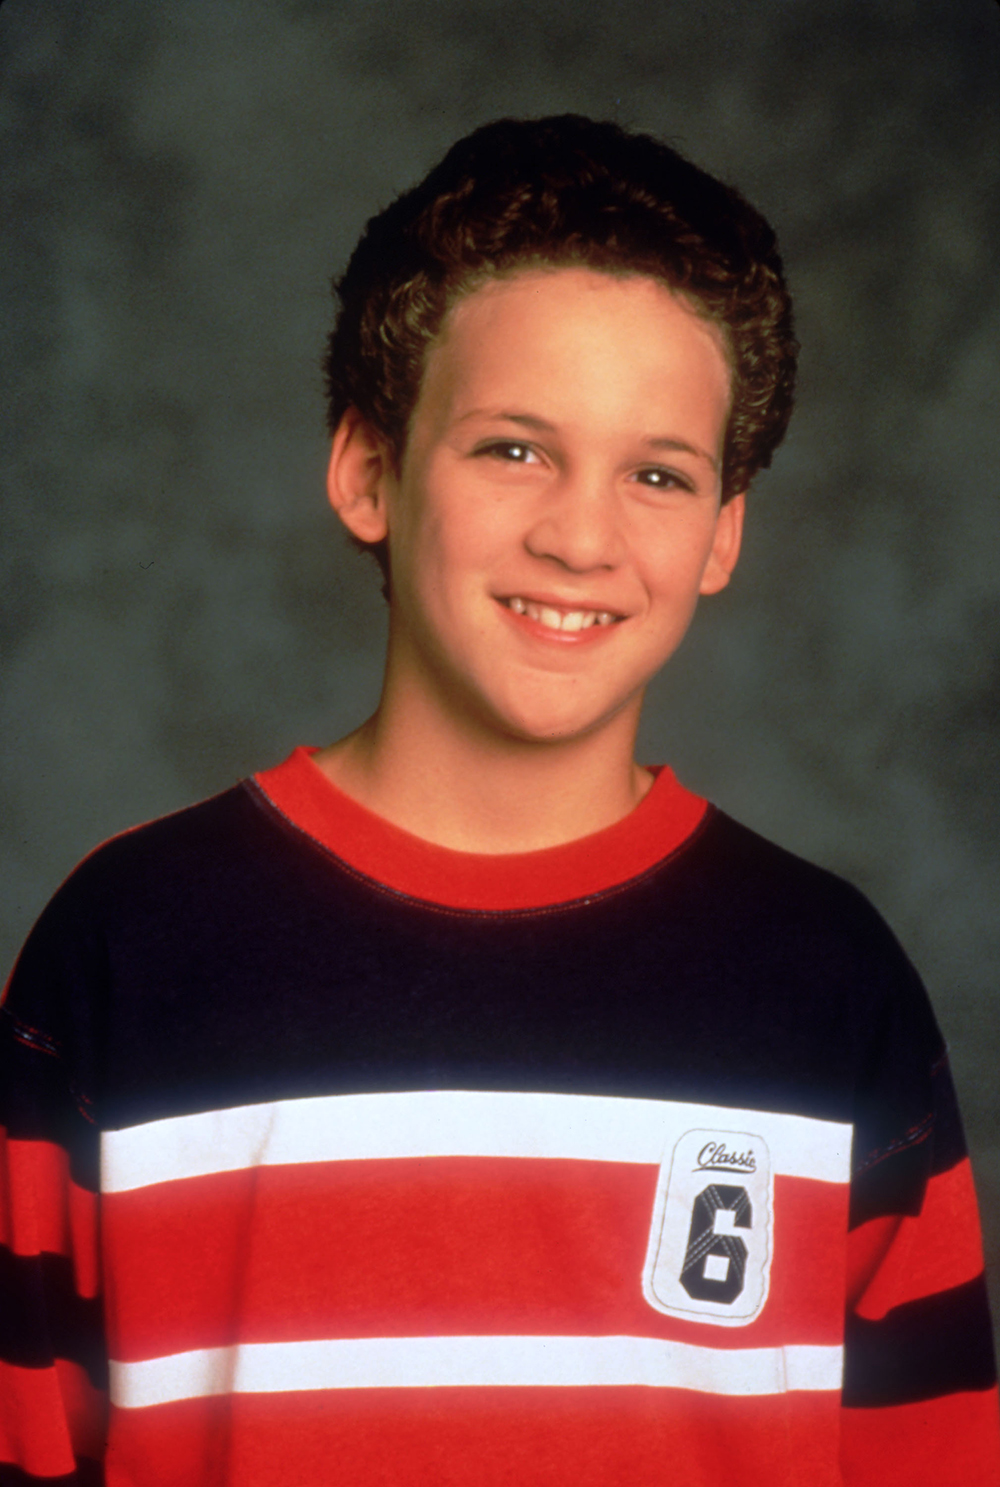 PICS Boy Meets World Pics — The Faces From The Classic Kids Show image